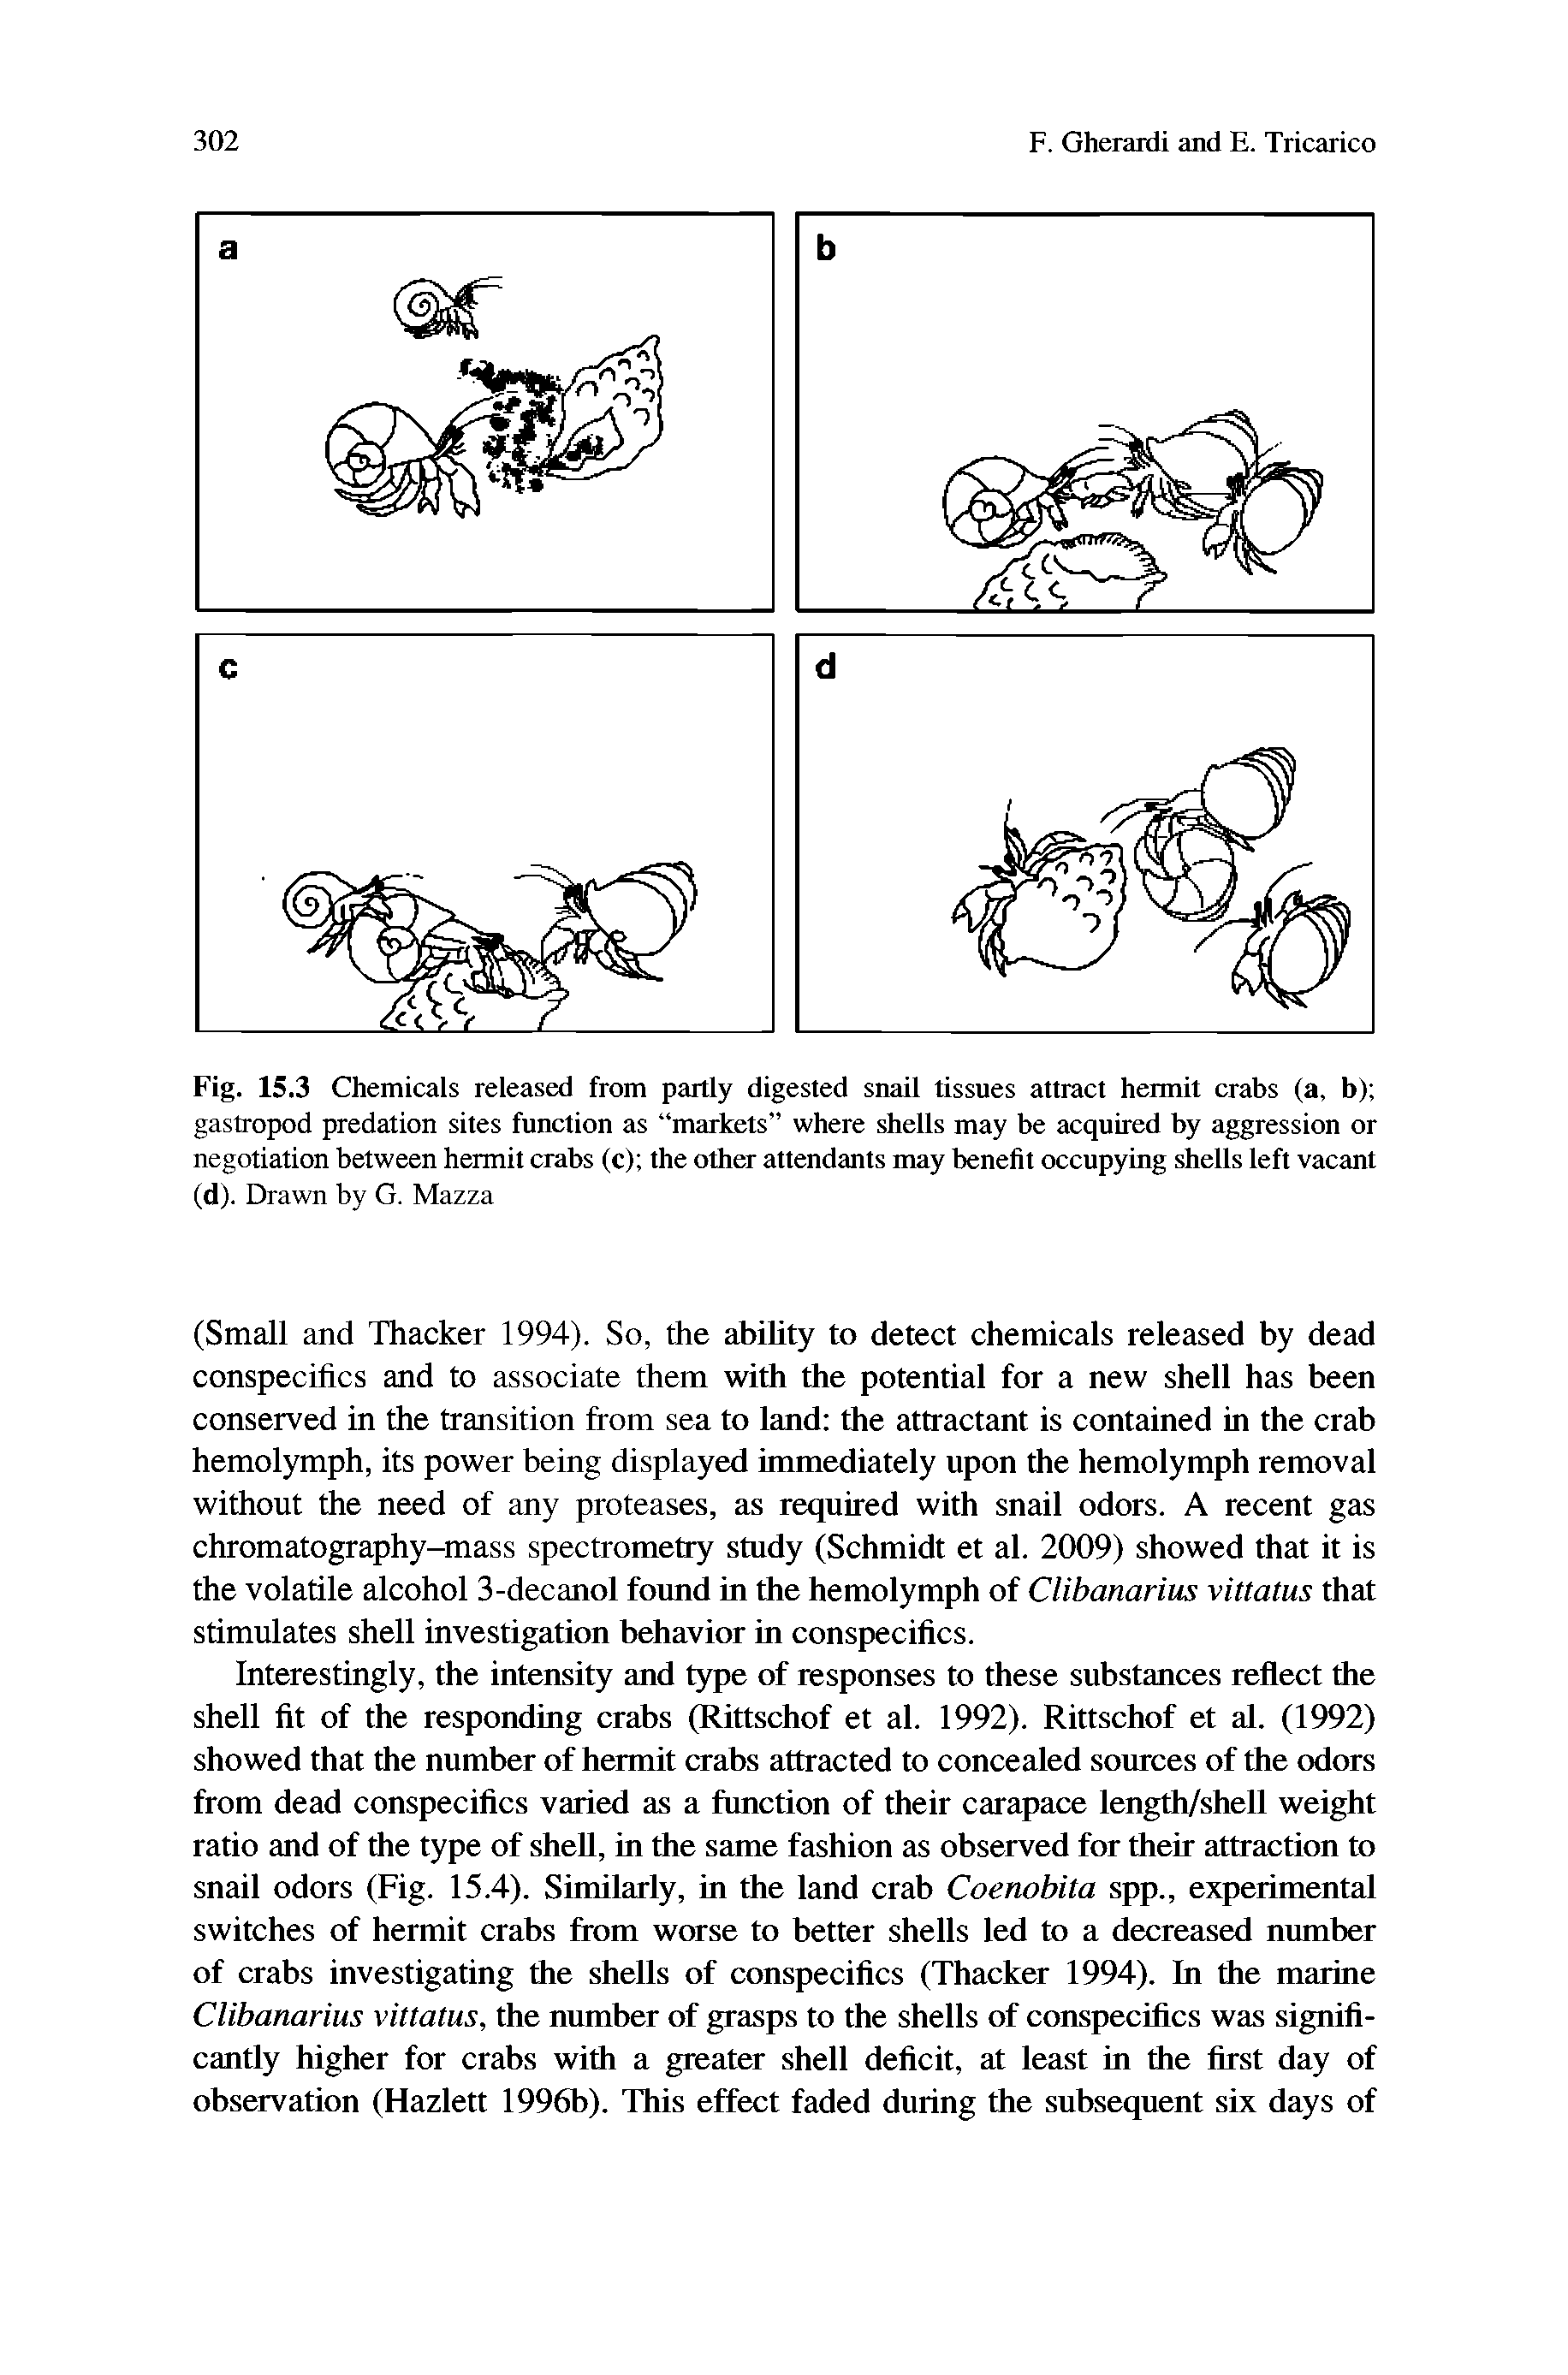 Fig. 15.3 Chemicals released from partly digested snail tissues attract hermit crabs (a, b) gastropod predation sites function as markets where shells may be acquired by aggression or negotiation between hermit crabs (c) the other attendants may benefit occupying shells left vacant (d). Drawn by G. Mazza...